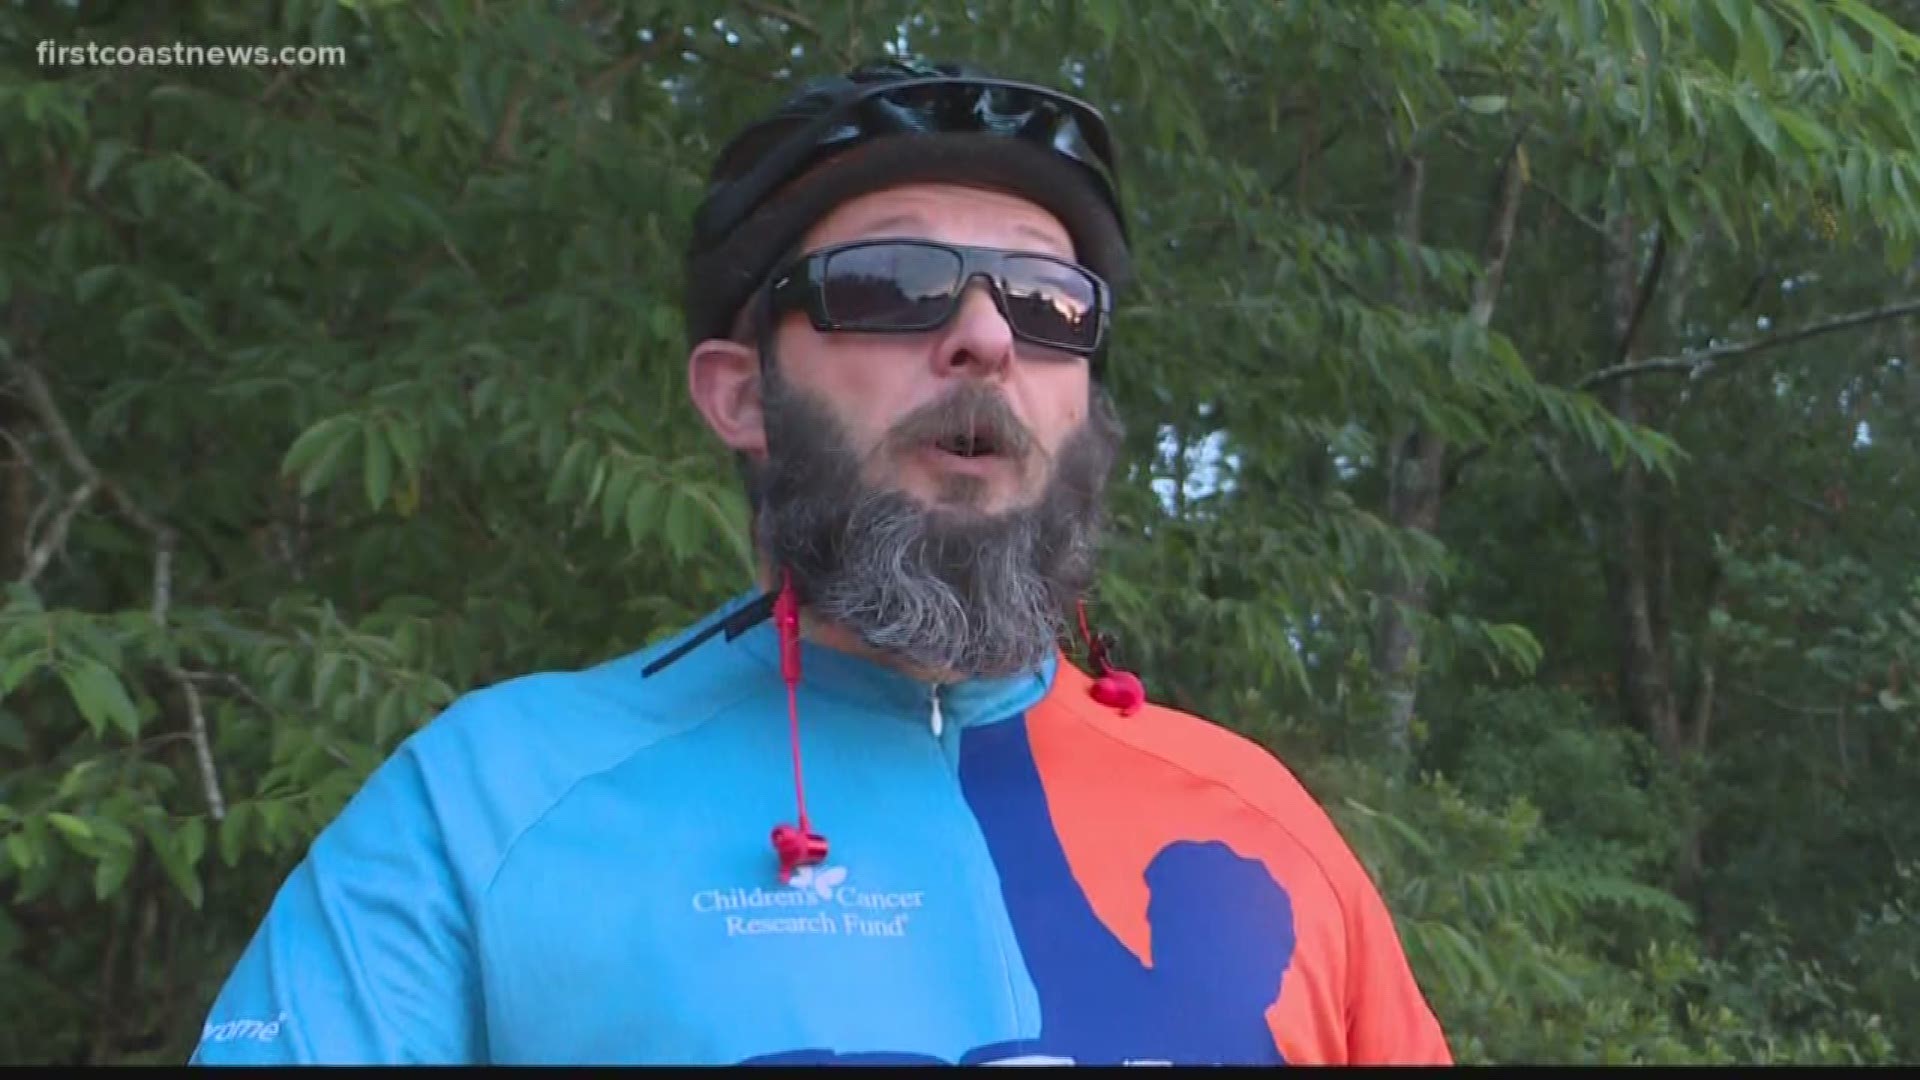 A Jacksonville man is leading a cycle challenge to help fight cancer.